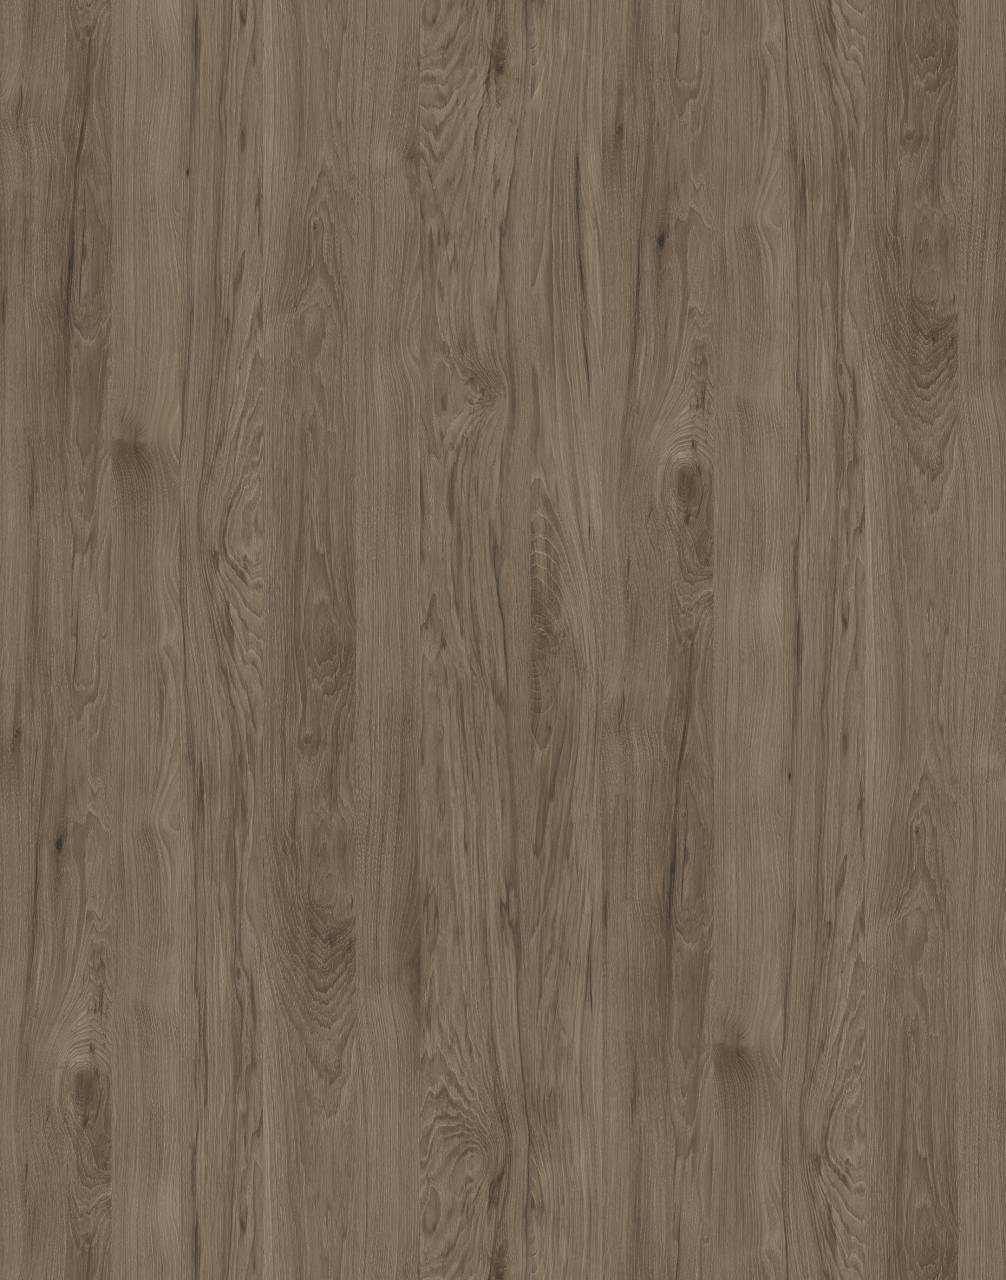 Dark Rockford Hickory PW HPL with textured surface and rich brown tones for a rustic and natural look.